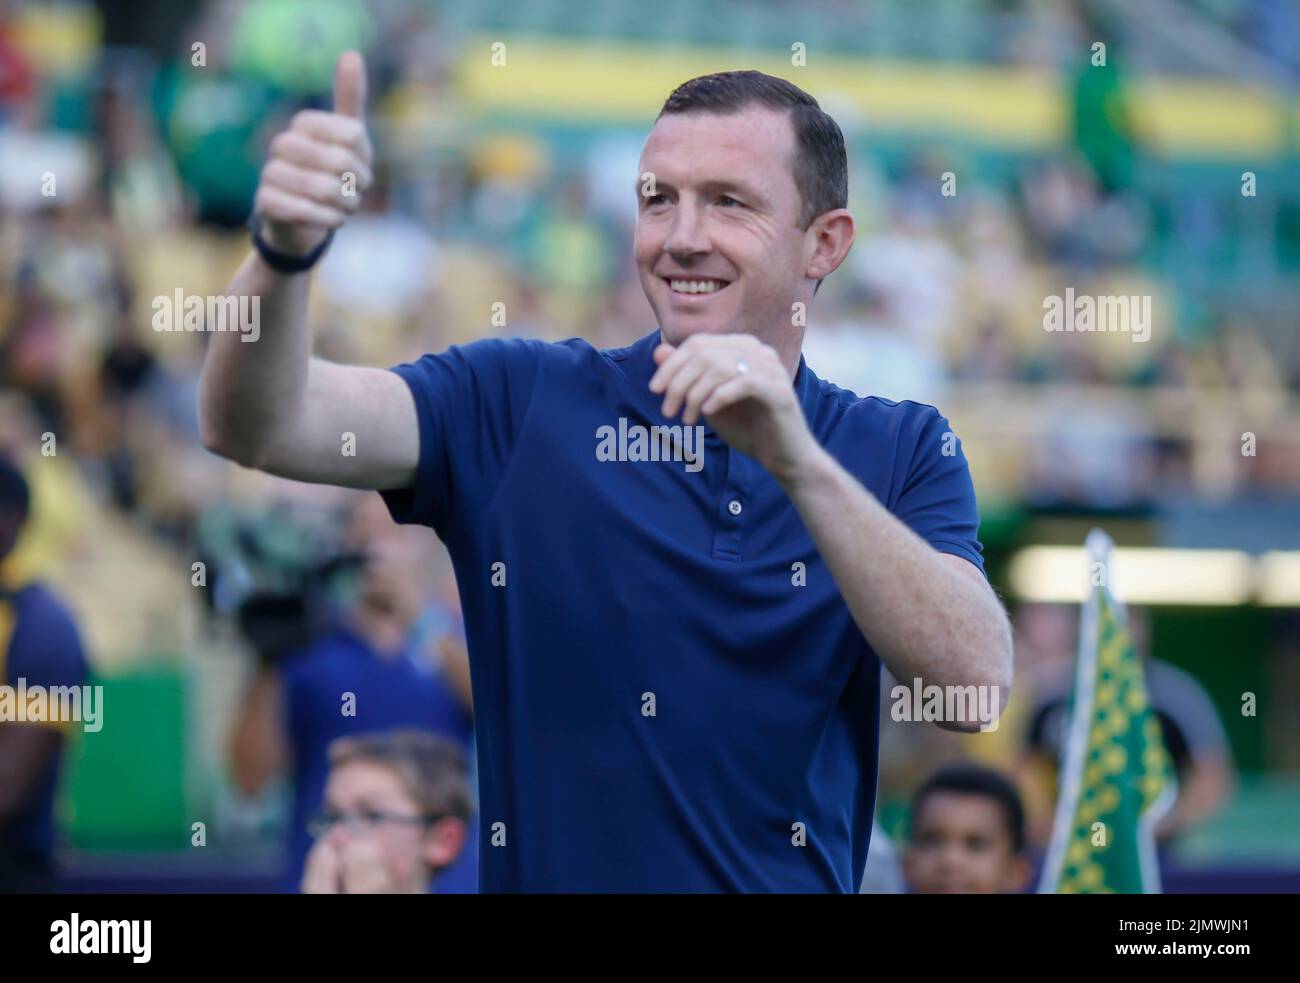 St. Petersburg, FL: Tampa Bay Rowdies head coach Neill /Collins gives a thumbs up to the fans prior to a USL soccer game against Detroit, Saturday, Au Stock Photo